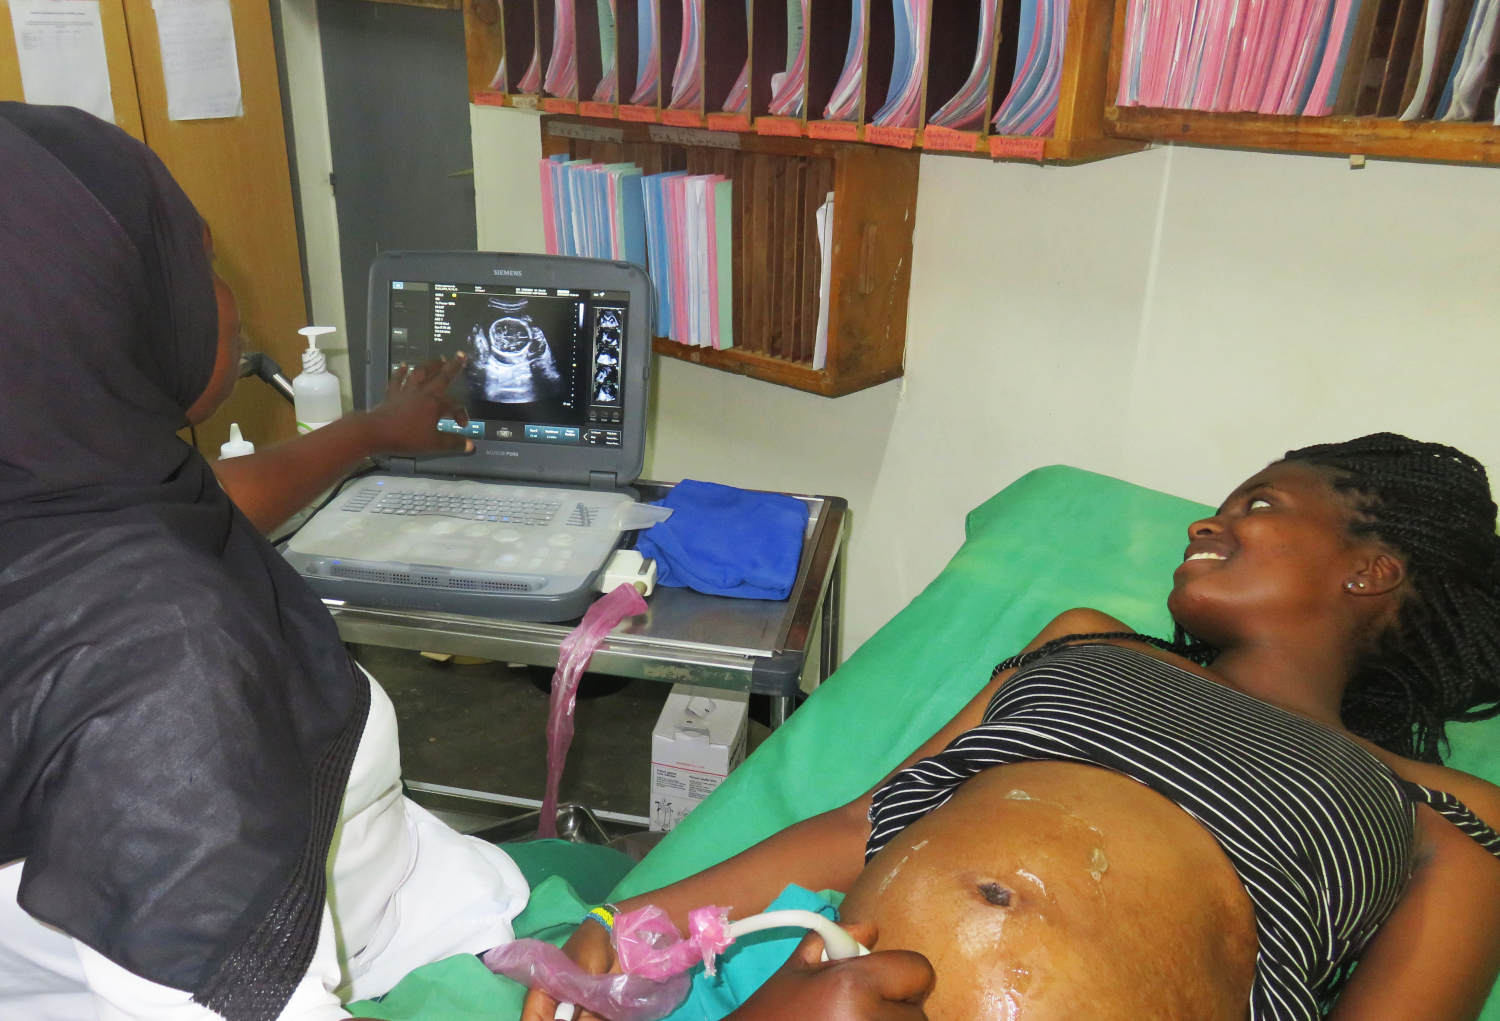 Ultrasound scan services accessible, available and affordable in Rwanda